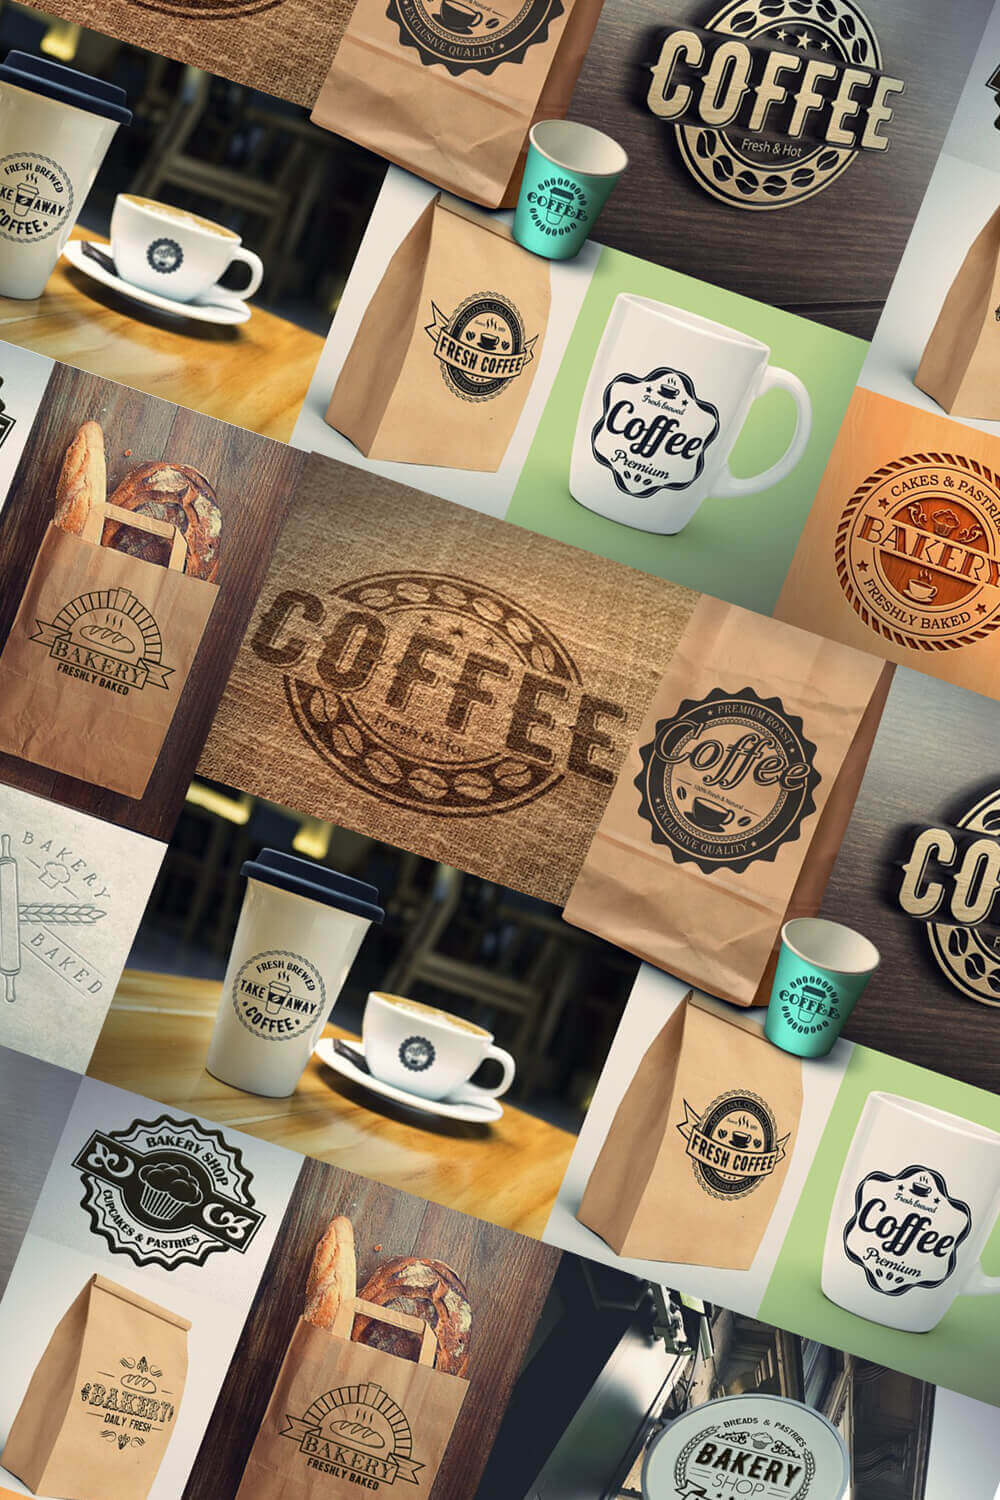 Lots of tiled coffee, bakery logos on different objects and signboards at an angle.